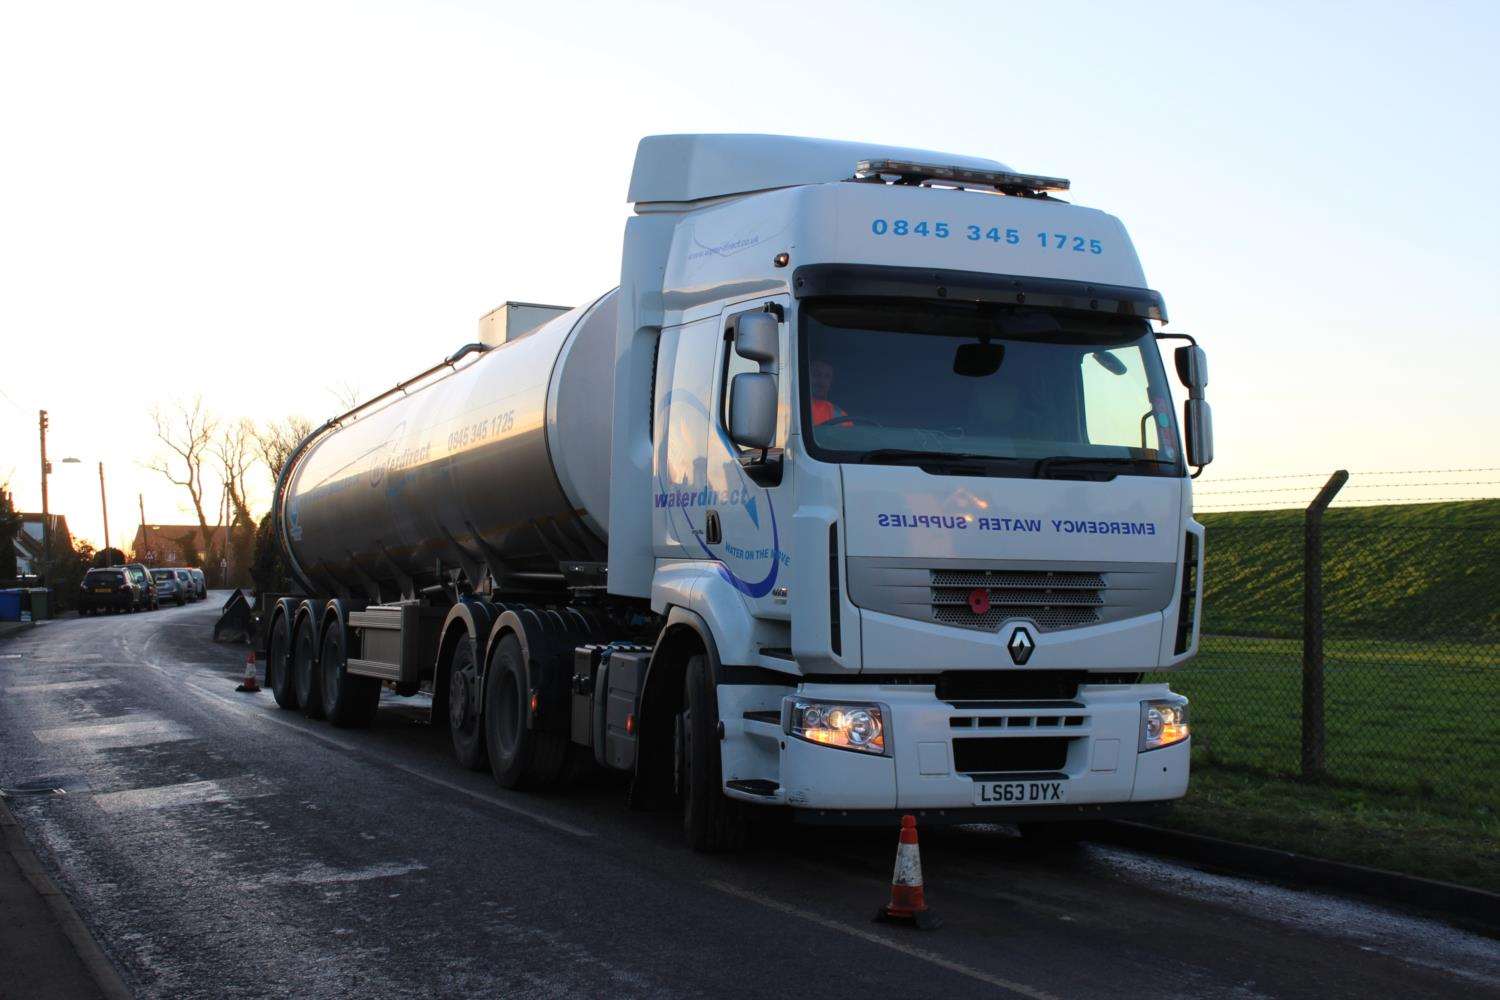 A tanker arrives to replenish water supplies